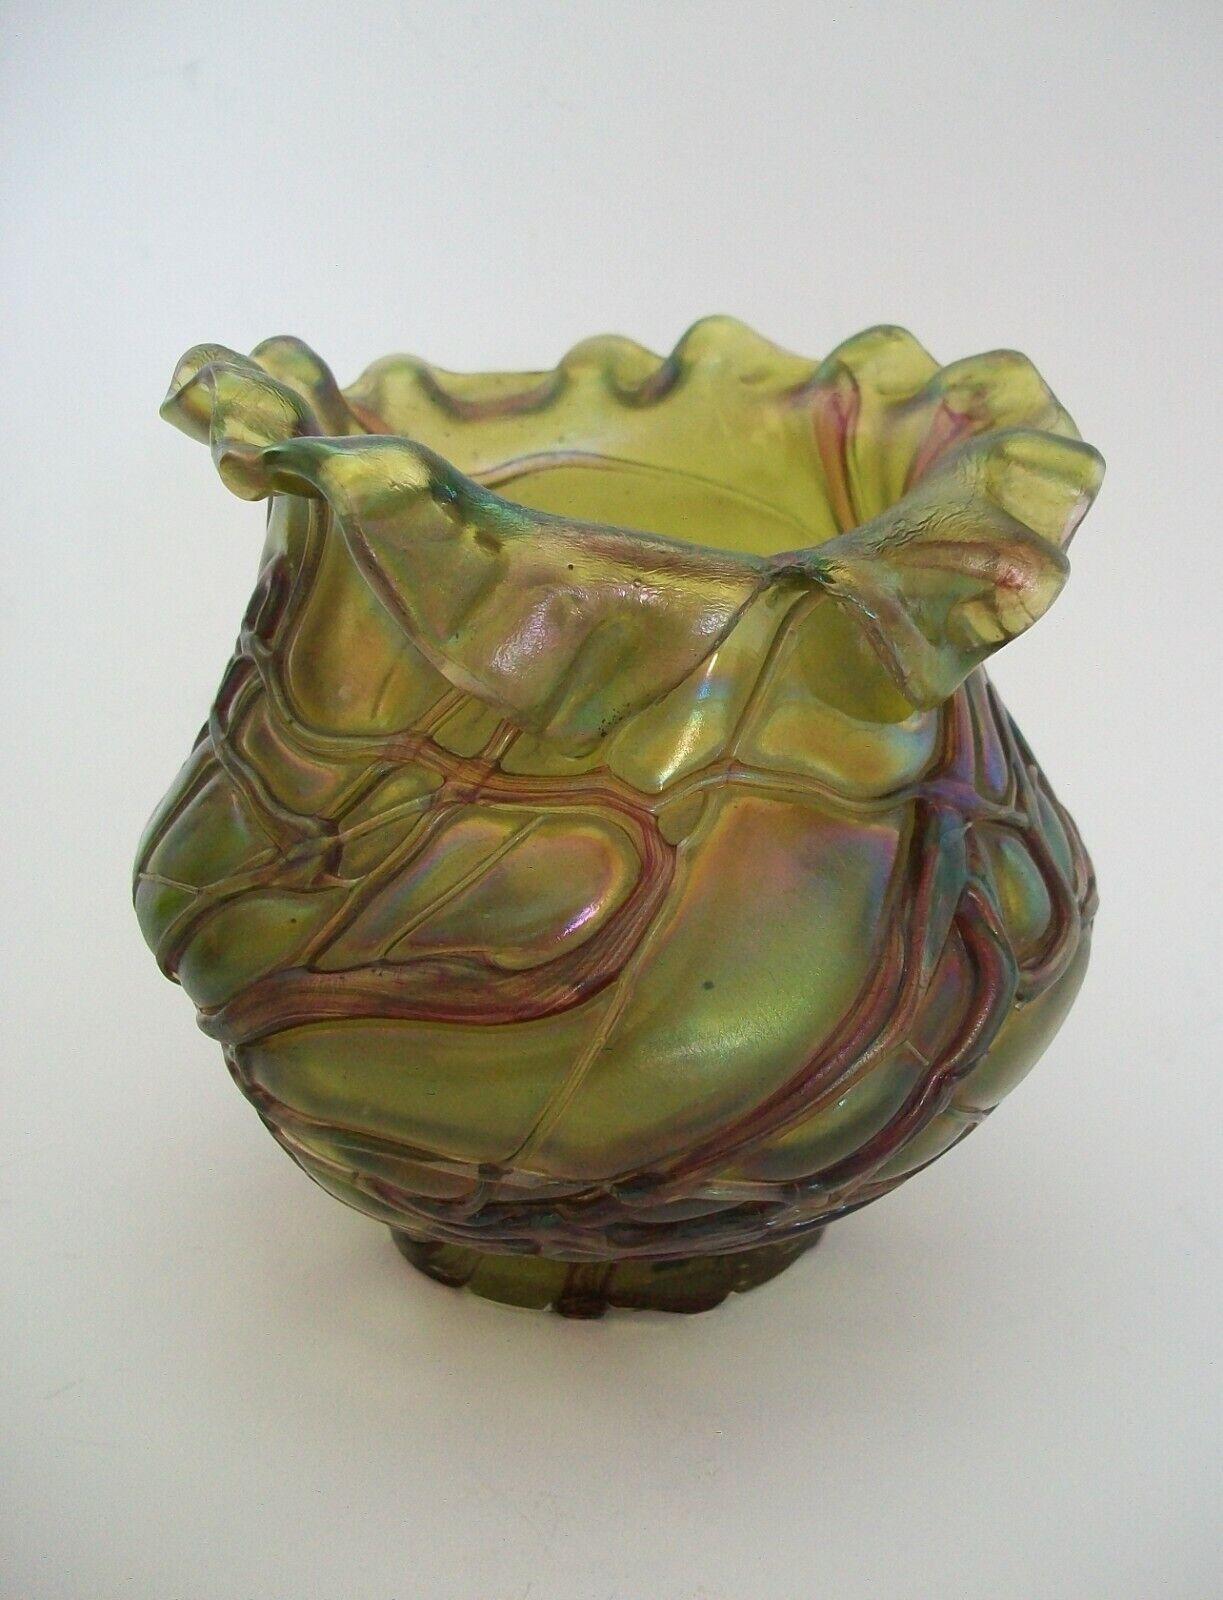 KRALIK - Antique Art Nouveau iridescent 'threaded' glass vase with dimpled sides and ruffled edge - striking green and red color combination - polished pontil mark to the base - unsigned - Czech Republic - circa 1900.

Excellent antique condition